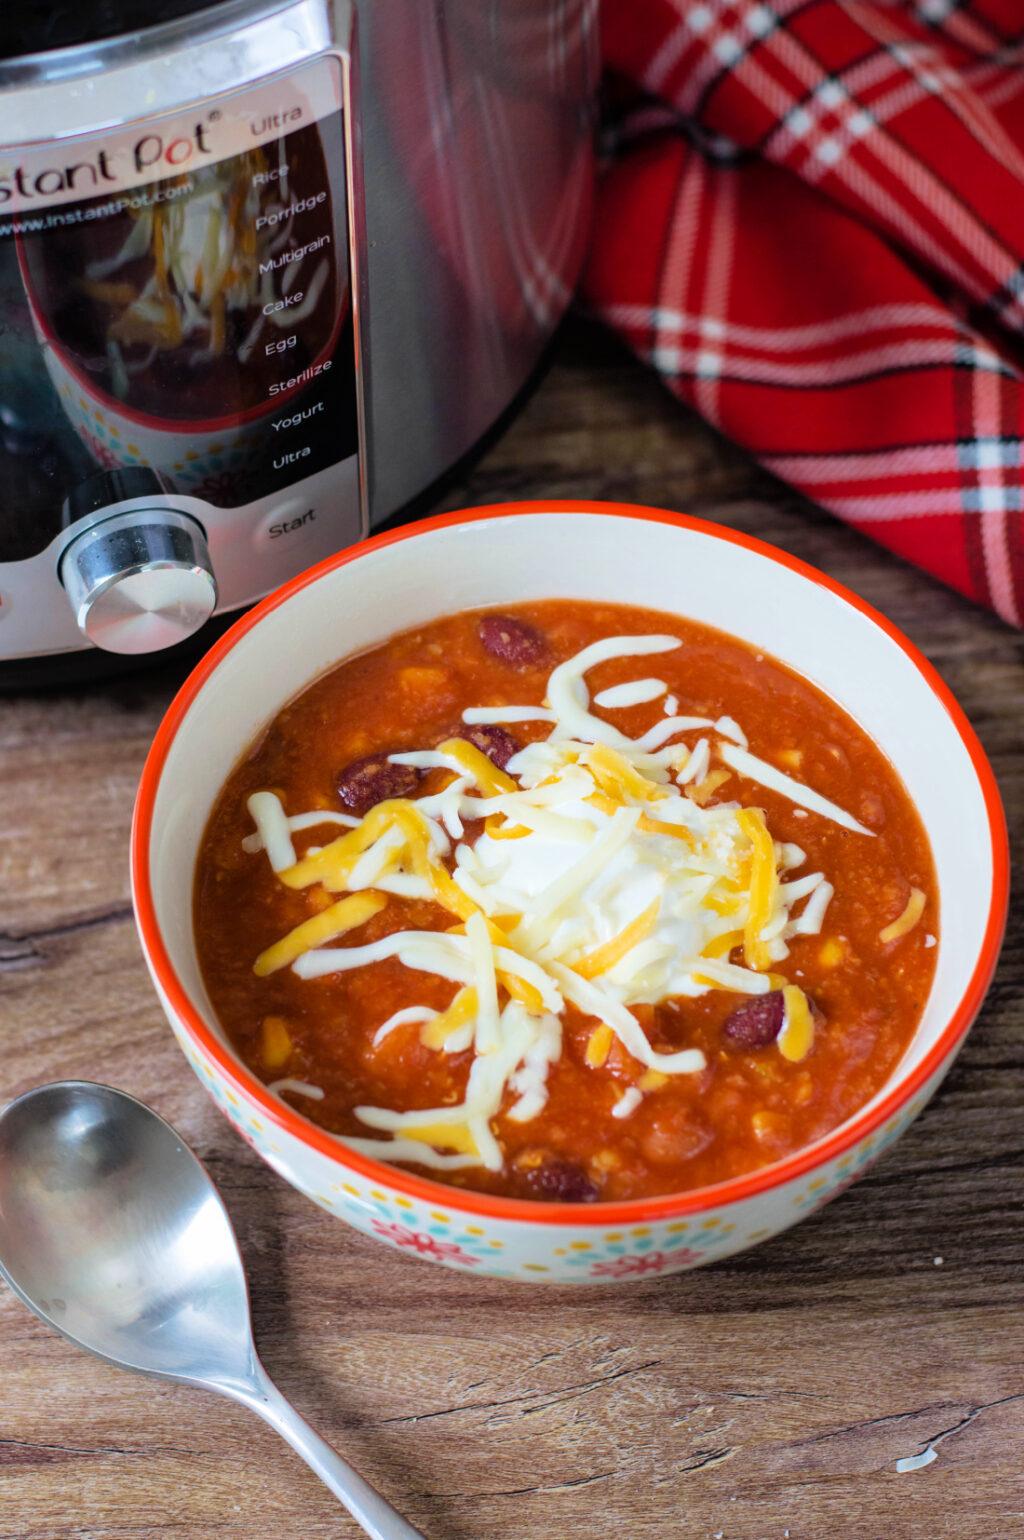 A bowl of vegetarian instant pot chili topped with shredded cheese and sour cream, next to an instant pot and a spoon, on a wooden surface.